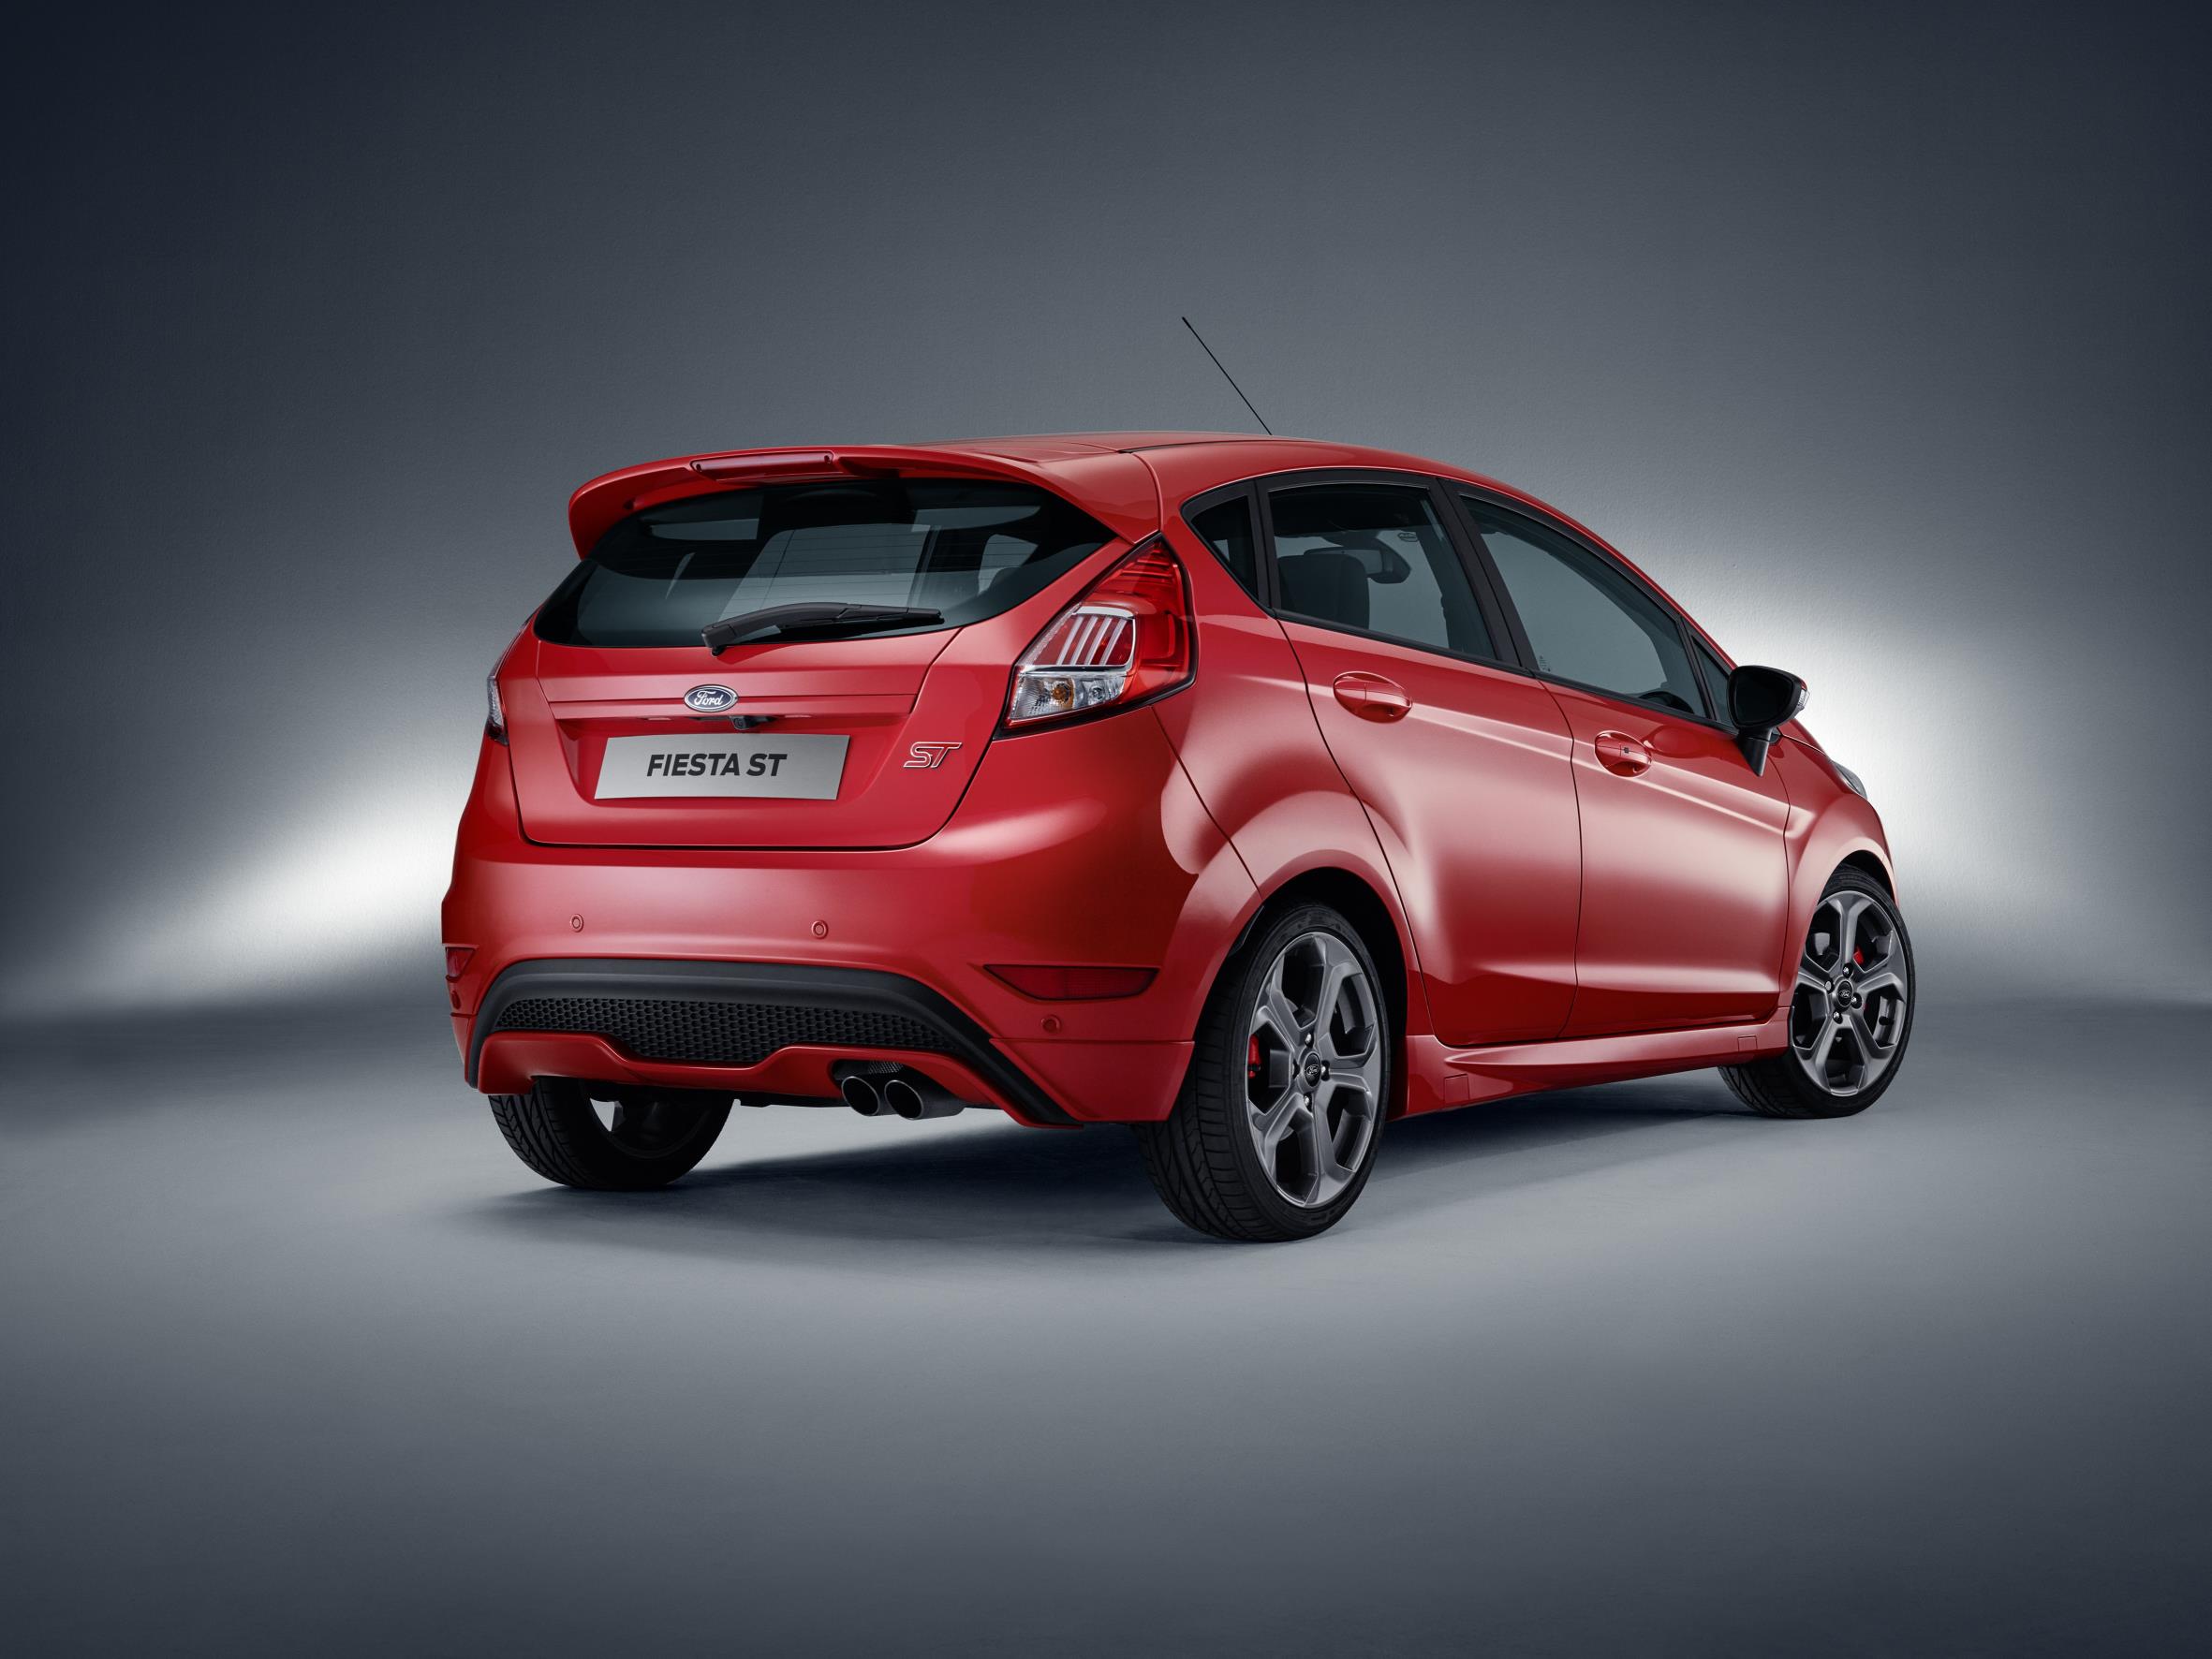 2017 Ford Fiesta ST FiveDoor Introduced In Europe